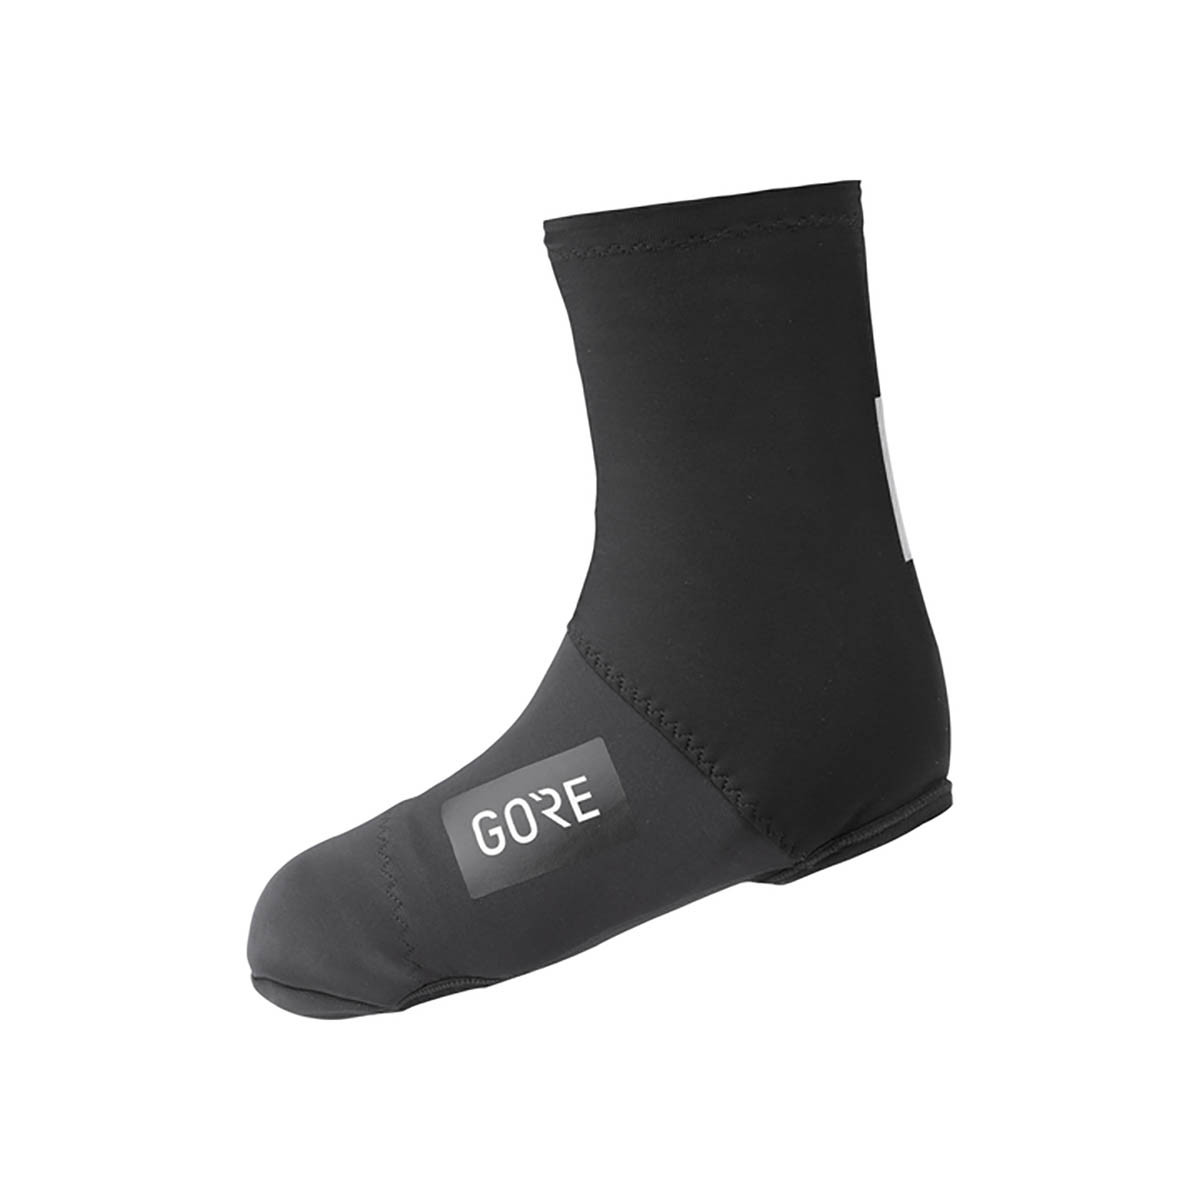 Gore Wear Thermo Overshoes - Black